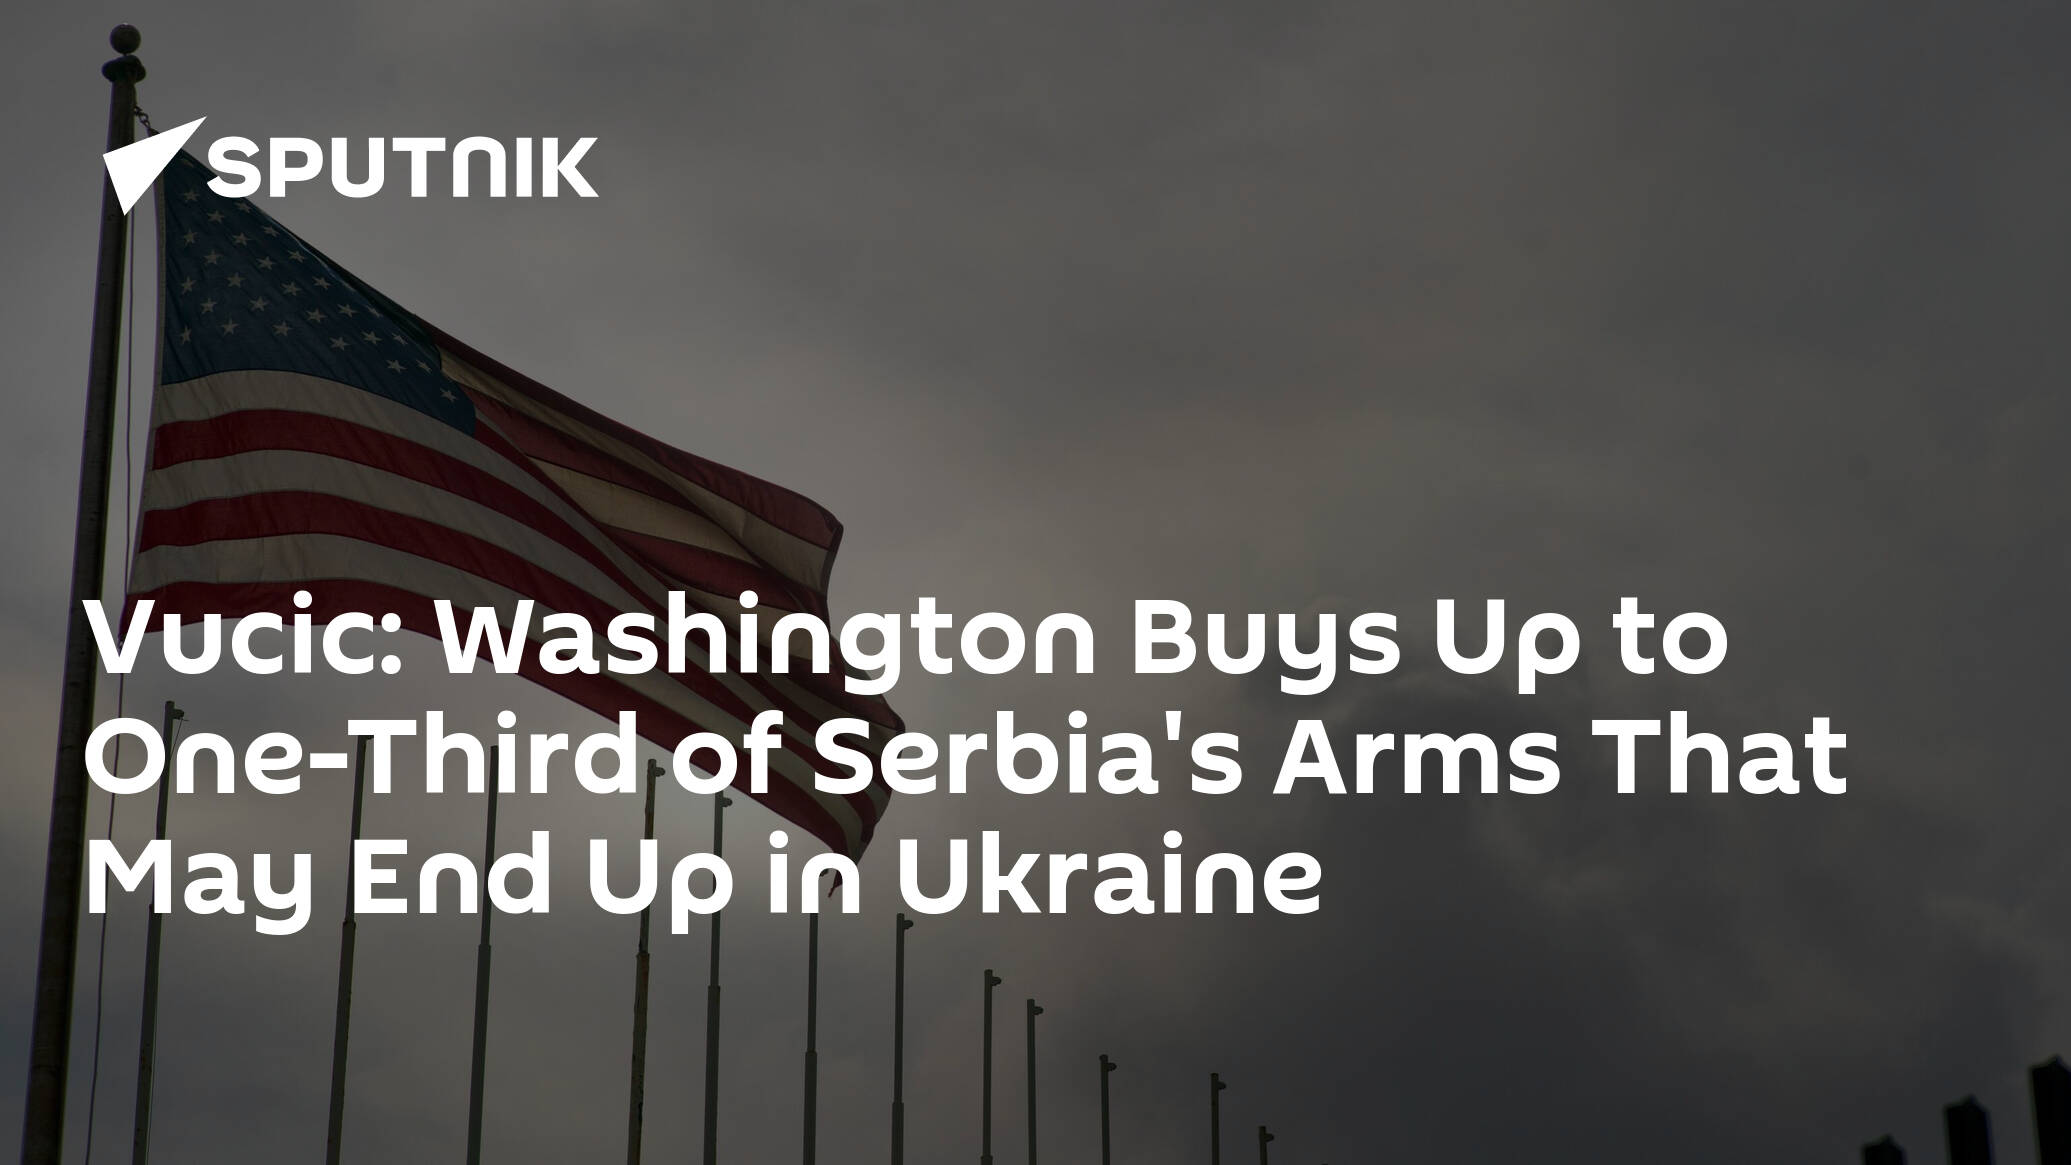 Vucic: Washington Buys Up to One-Third of Serbia's Arms That May End Up in Ukraine